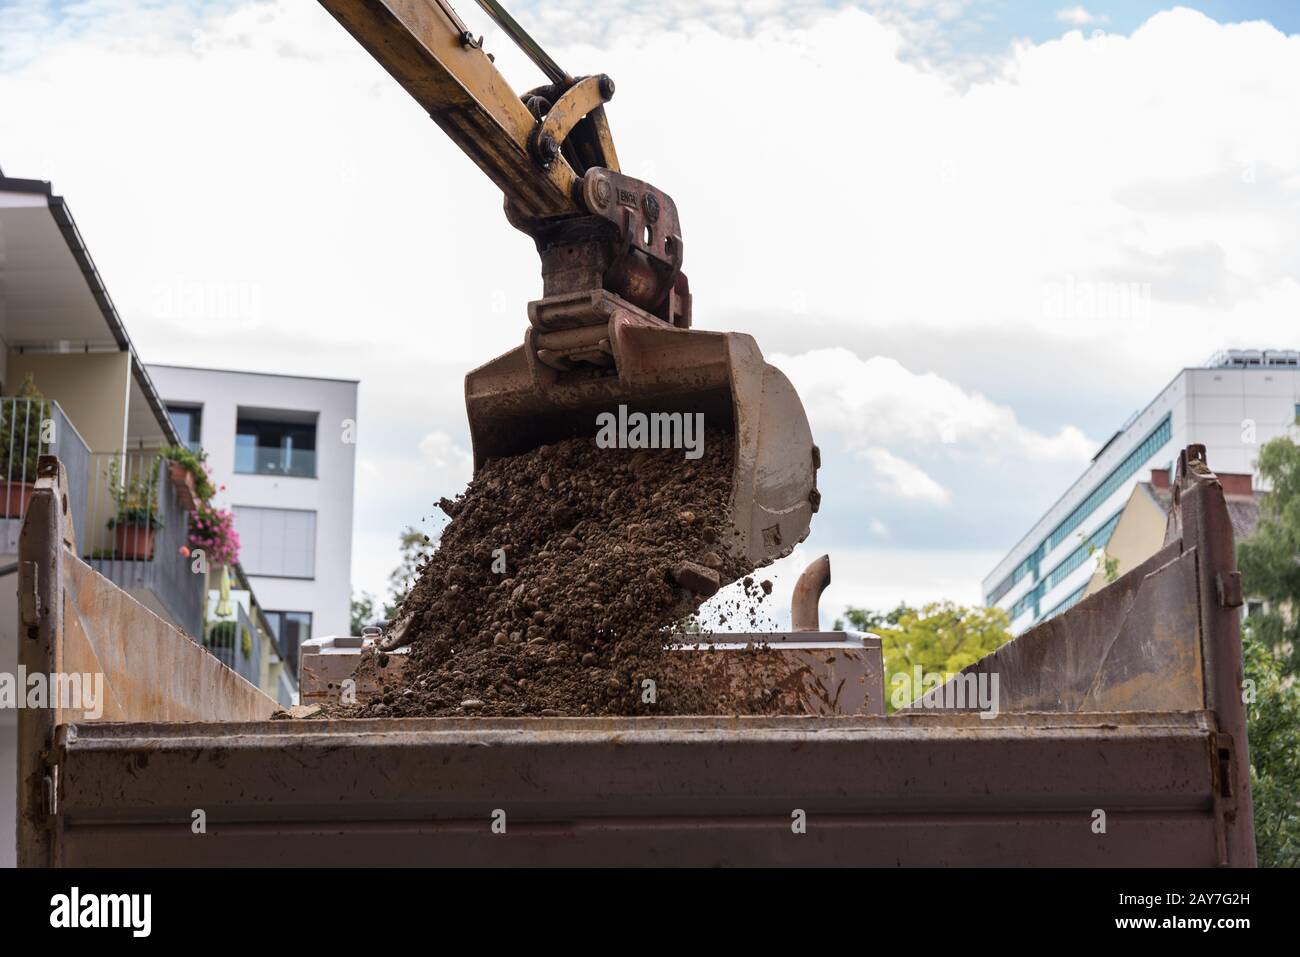 Bucket excavator loads building rubble onto truck at a construction site Stock Photo